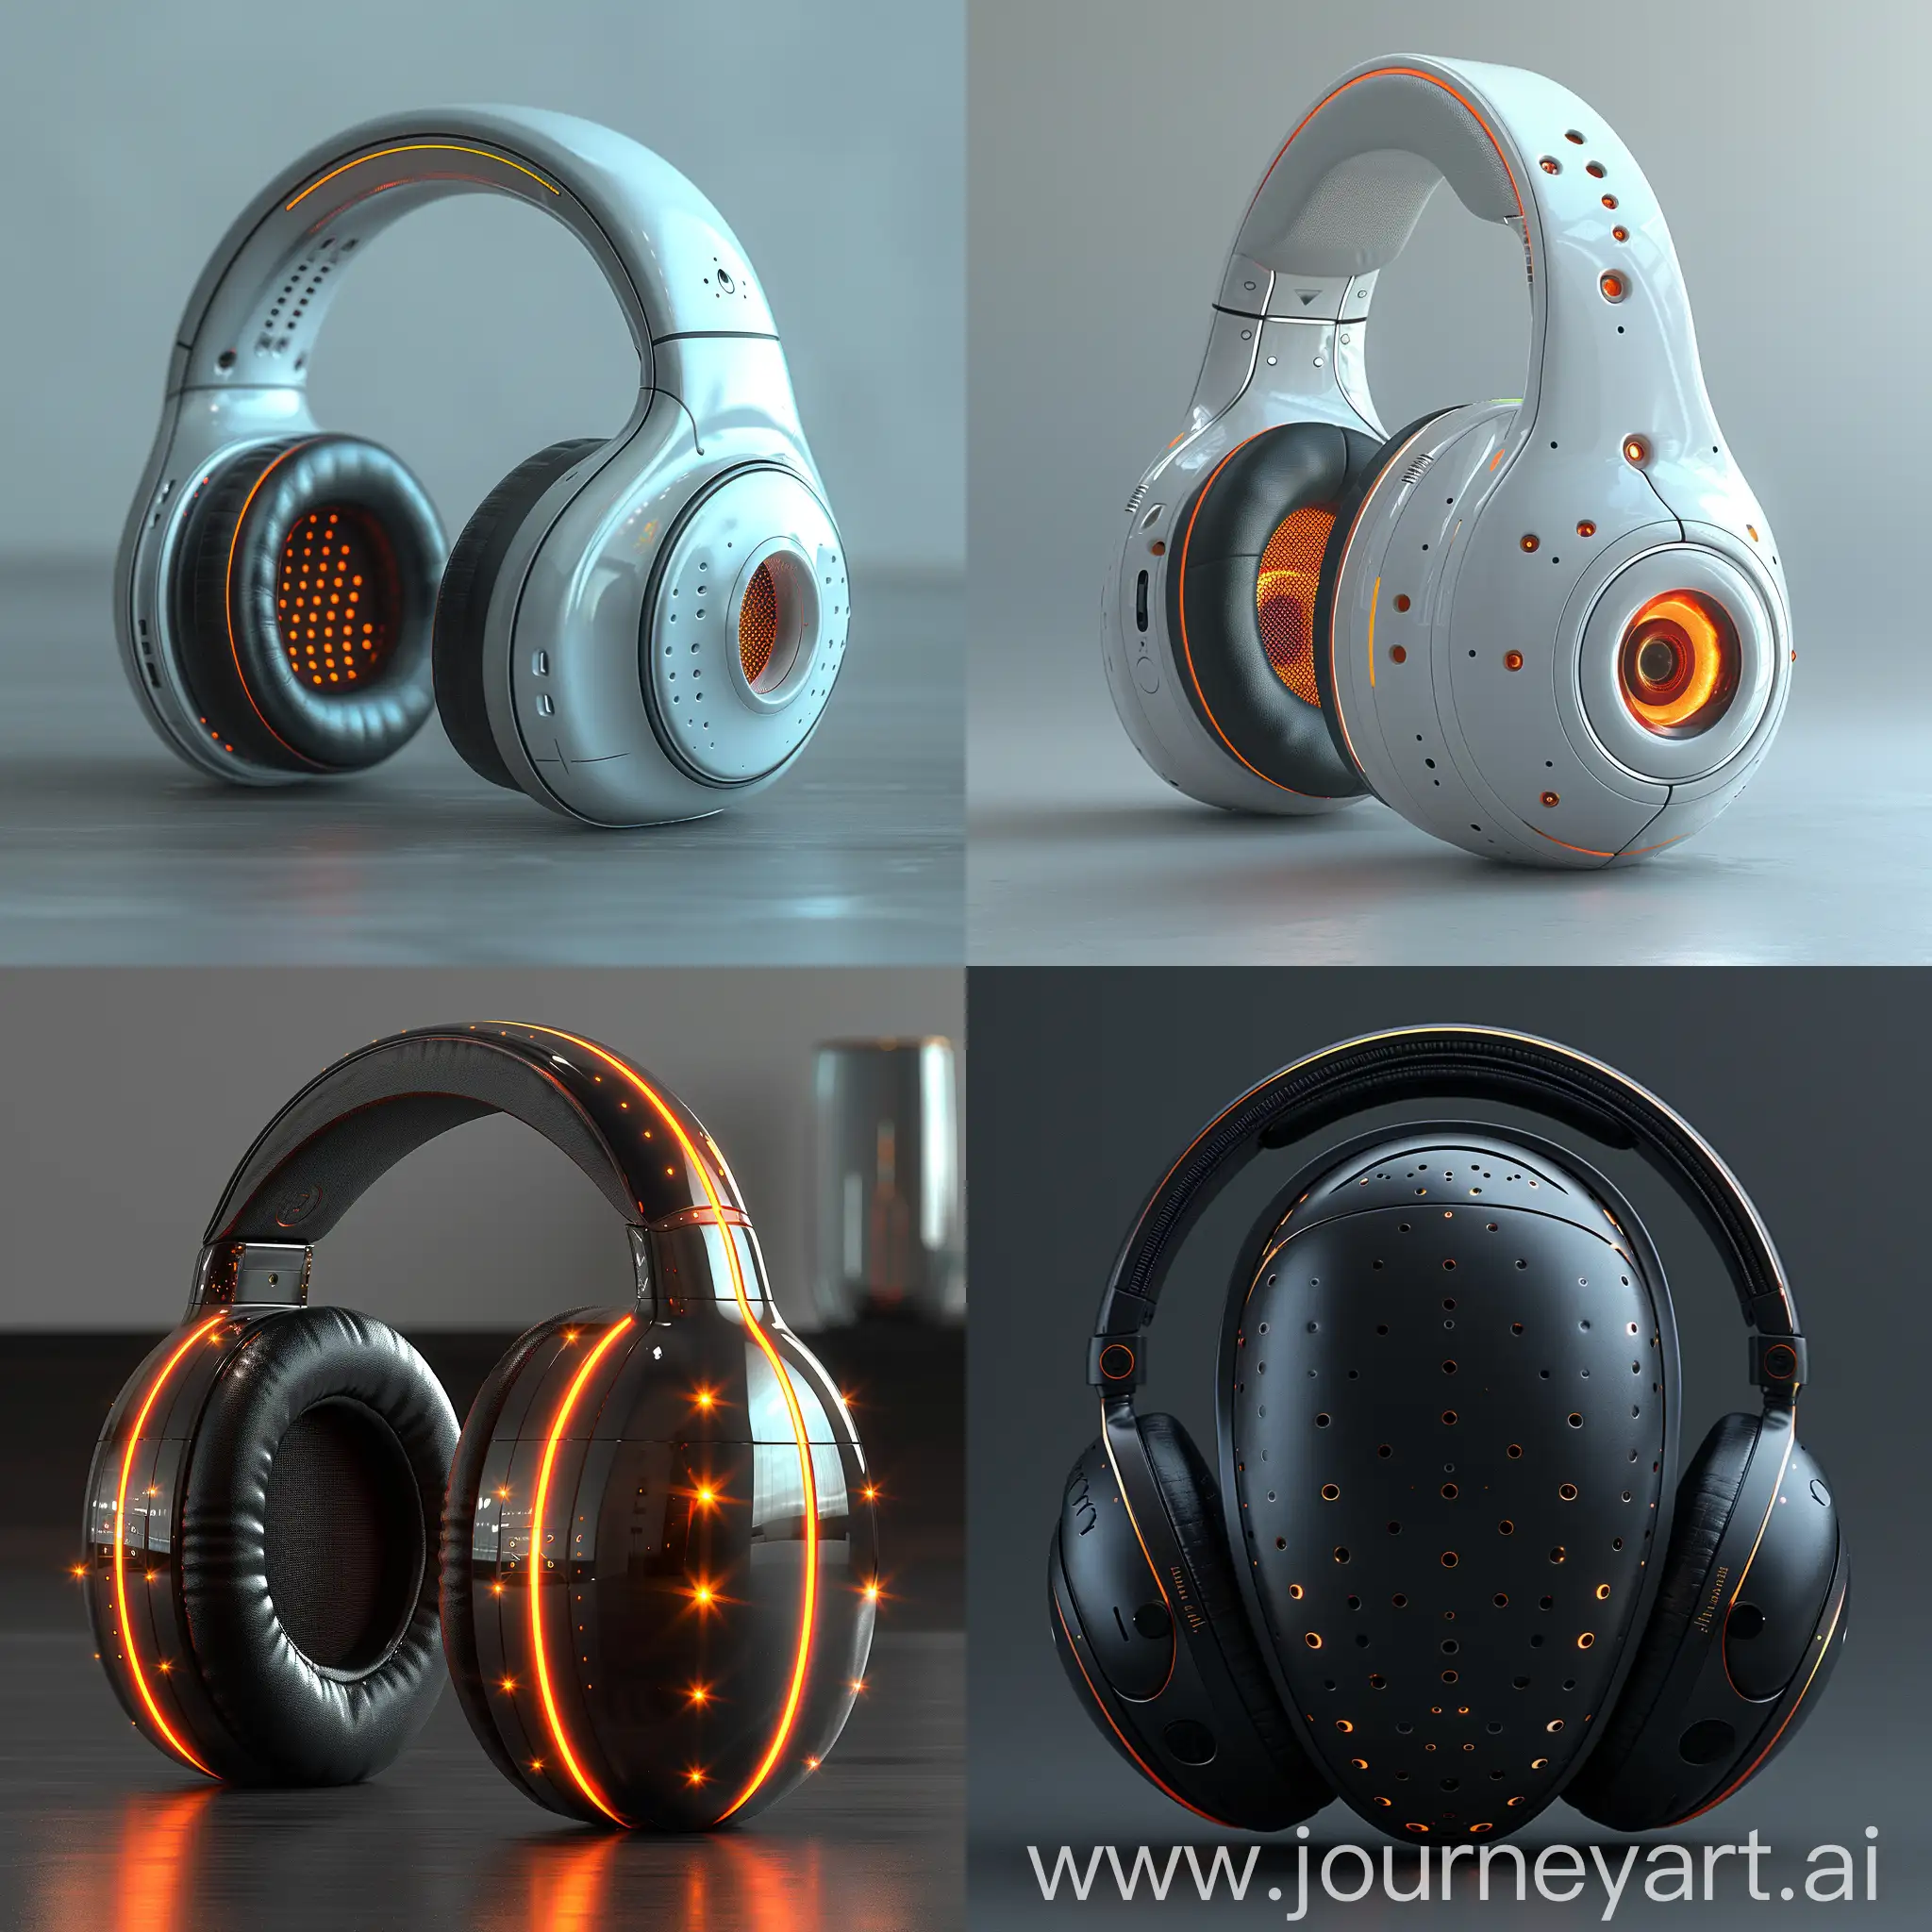 Futuristic PC headphones, Augmented Reality Integration, Brain-Computer Interface, Holographic Display, Biometric Sensors, Voice Command Technology, Real-time Language Translation, Adaptive Noise Cancellation, Wireless Charging, Gesture Controls, Modular Design, Recycled Materials, Energy-Efficient, Biodegradable Components, Sustainable Packaging, Repairability, Carbon Neutral Production, Minimalist Design, Low Toxicity, Eco-friendly Certifications, End-of-Life Recycling, Nanoparticle Coating, Nanowire Technology, Nano-Scale Transducers, Self-Healing Materials, Nanoporous Structures, Nanoparticle Filters, Nano-Enhanced Batteries, Nanoscale Antennas, Nanoparticle Sensors, Nanostructured Composites, octane render --stylize 1000